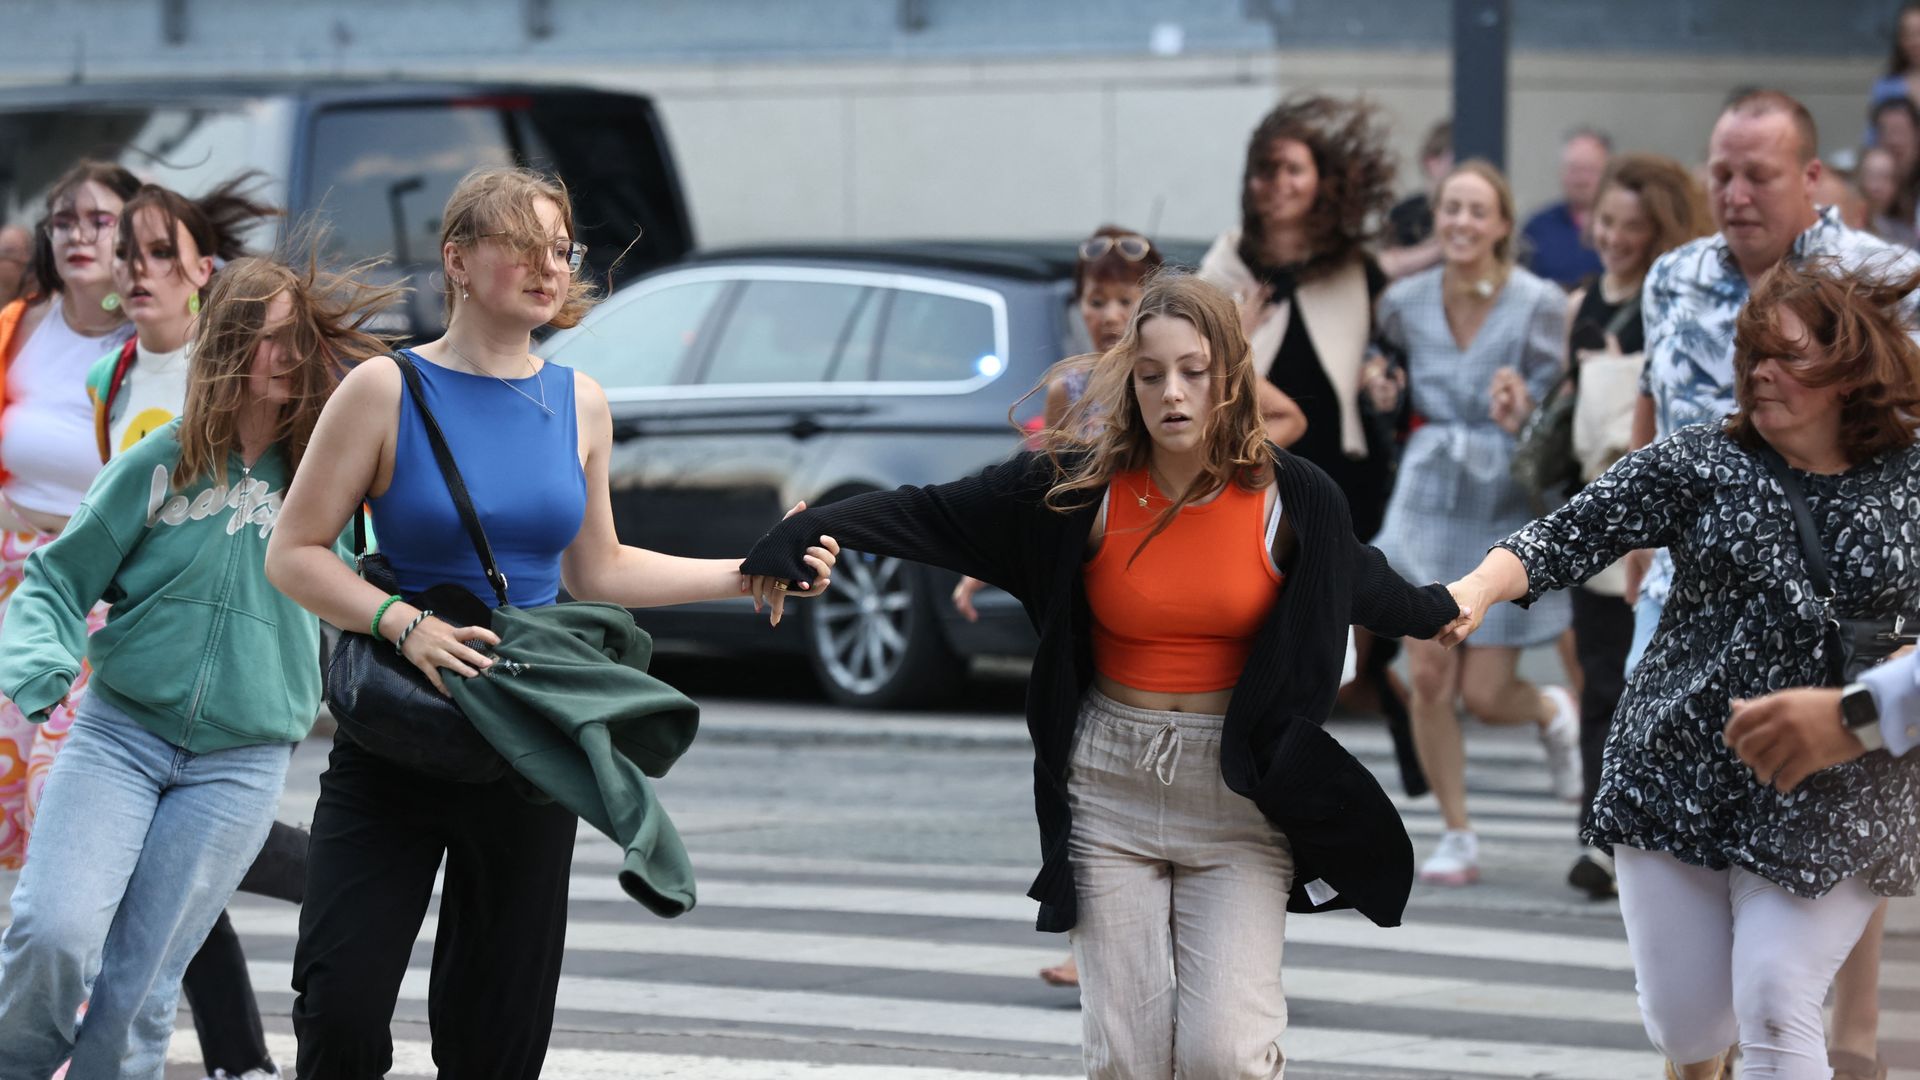 People are seen running during the evacuation of the Fields shopping center